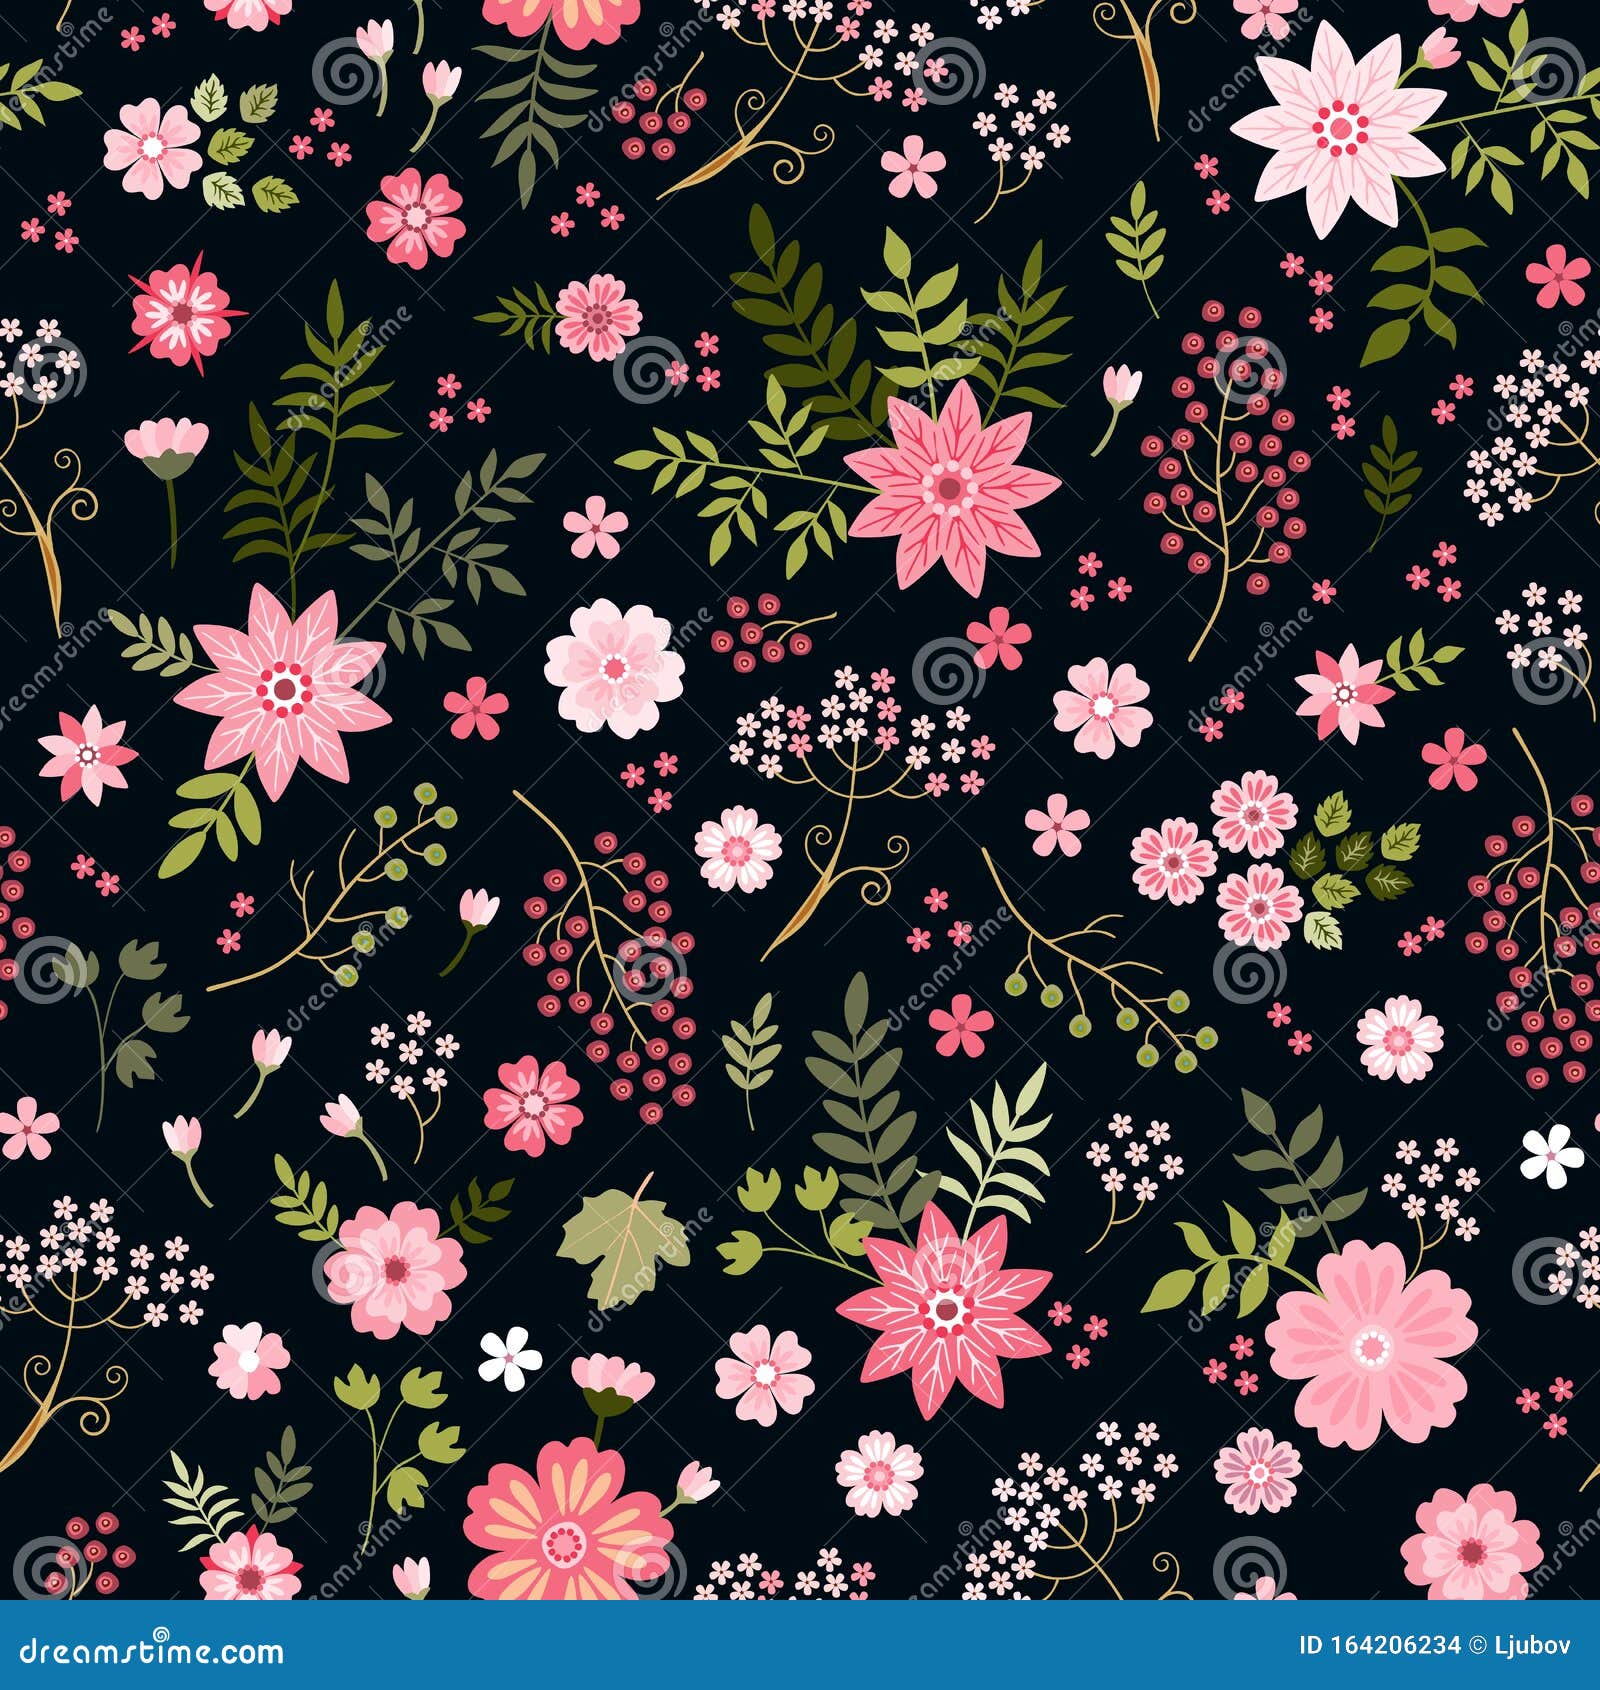 Seamless Ditsy Floral Pattern with Cute Pink Flowers and Green Leaves on Black  Background. Fashion Design Stock Vector - Illustration of feminine, fabric:  164206234